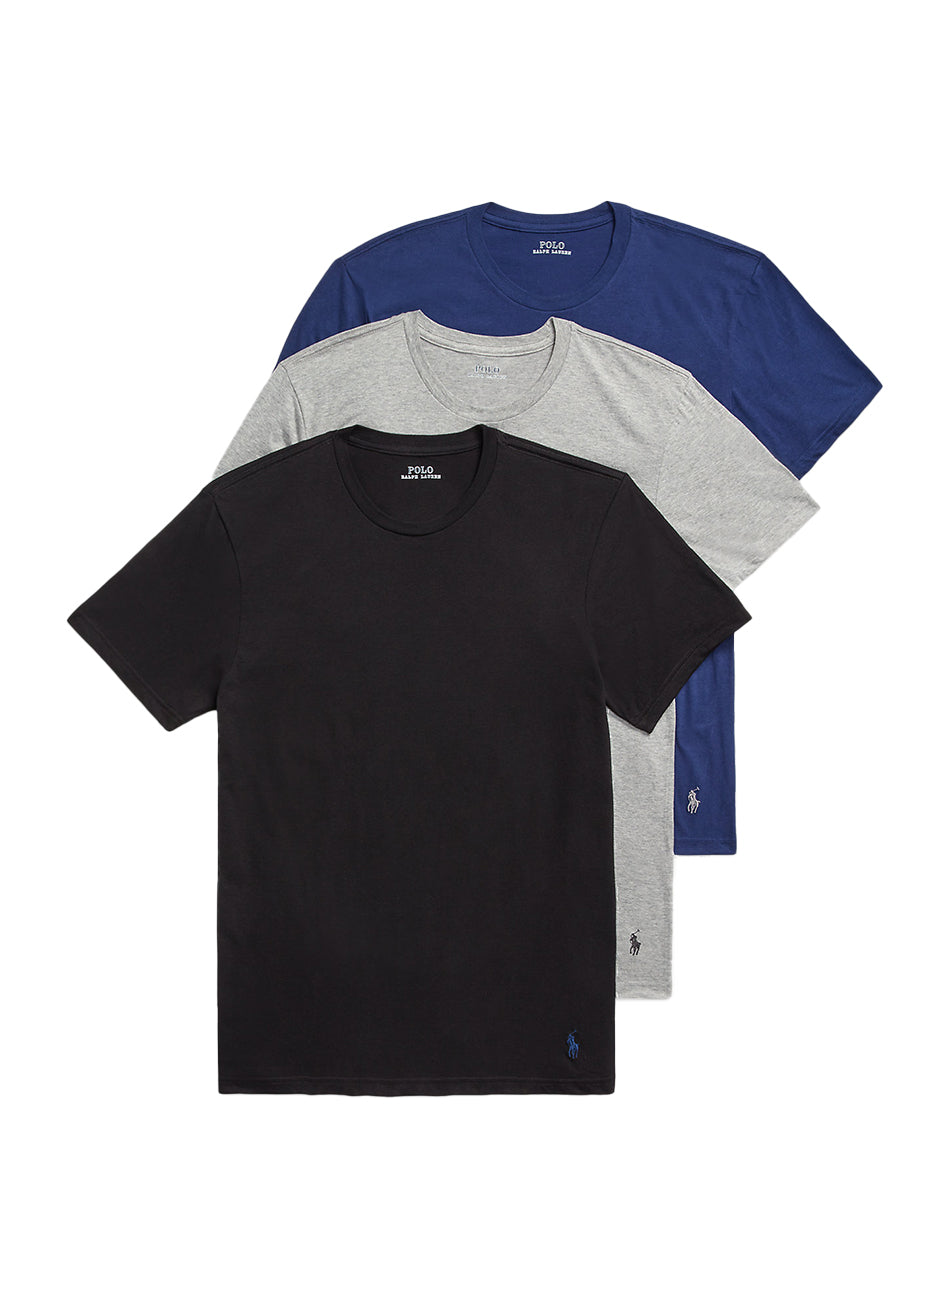 (NCCNP3-FHA2) Classic Fit Cotton Crew T-Shirt 3 Pack - Freshwater/Grey/Black